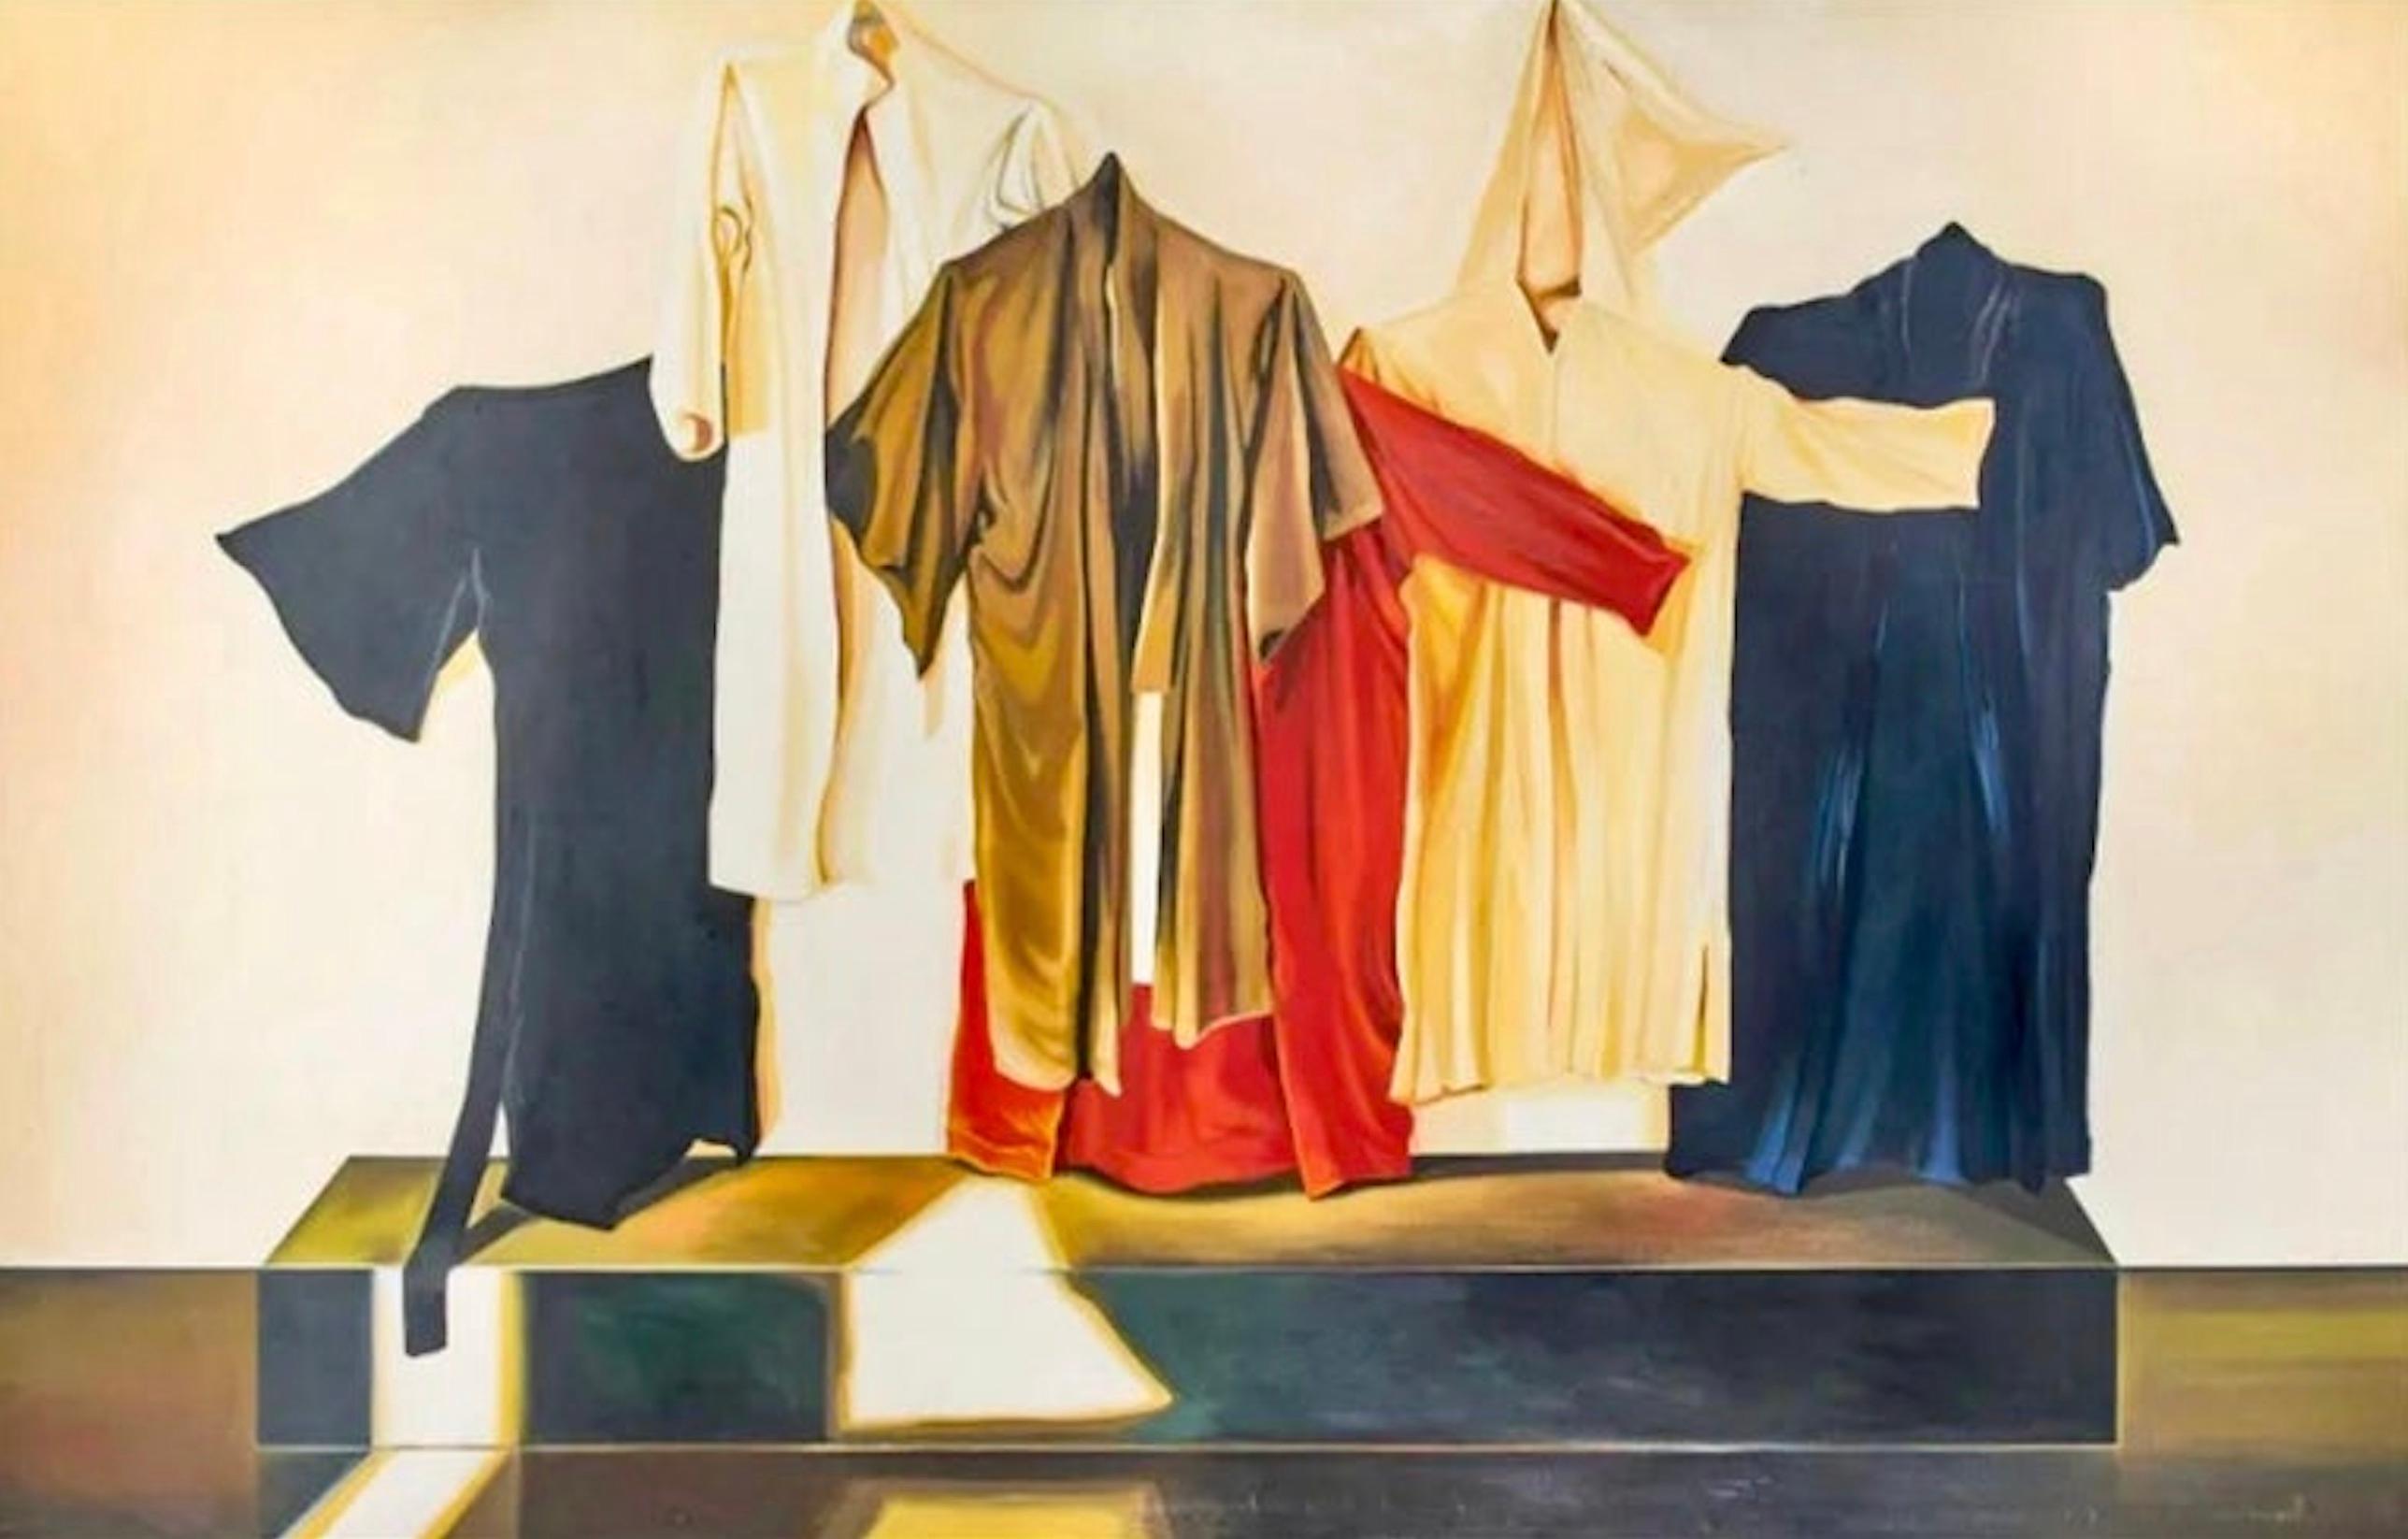 Artist: Lowell Nesbitt (1933-1993)
Title: Six Robes
Year: 1974
Medium: Oil on canvas
Size: 74 x 117 inches
Condition: Good
Inscription: Signed, dated, titled by the artist, verso
Provenance: Gertrude Kasle Gallery, Detroit, Michigan; Andrew Crispo